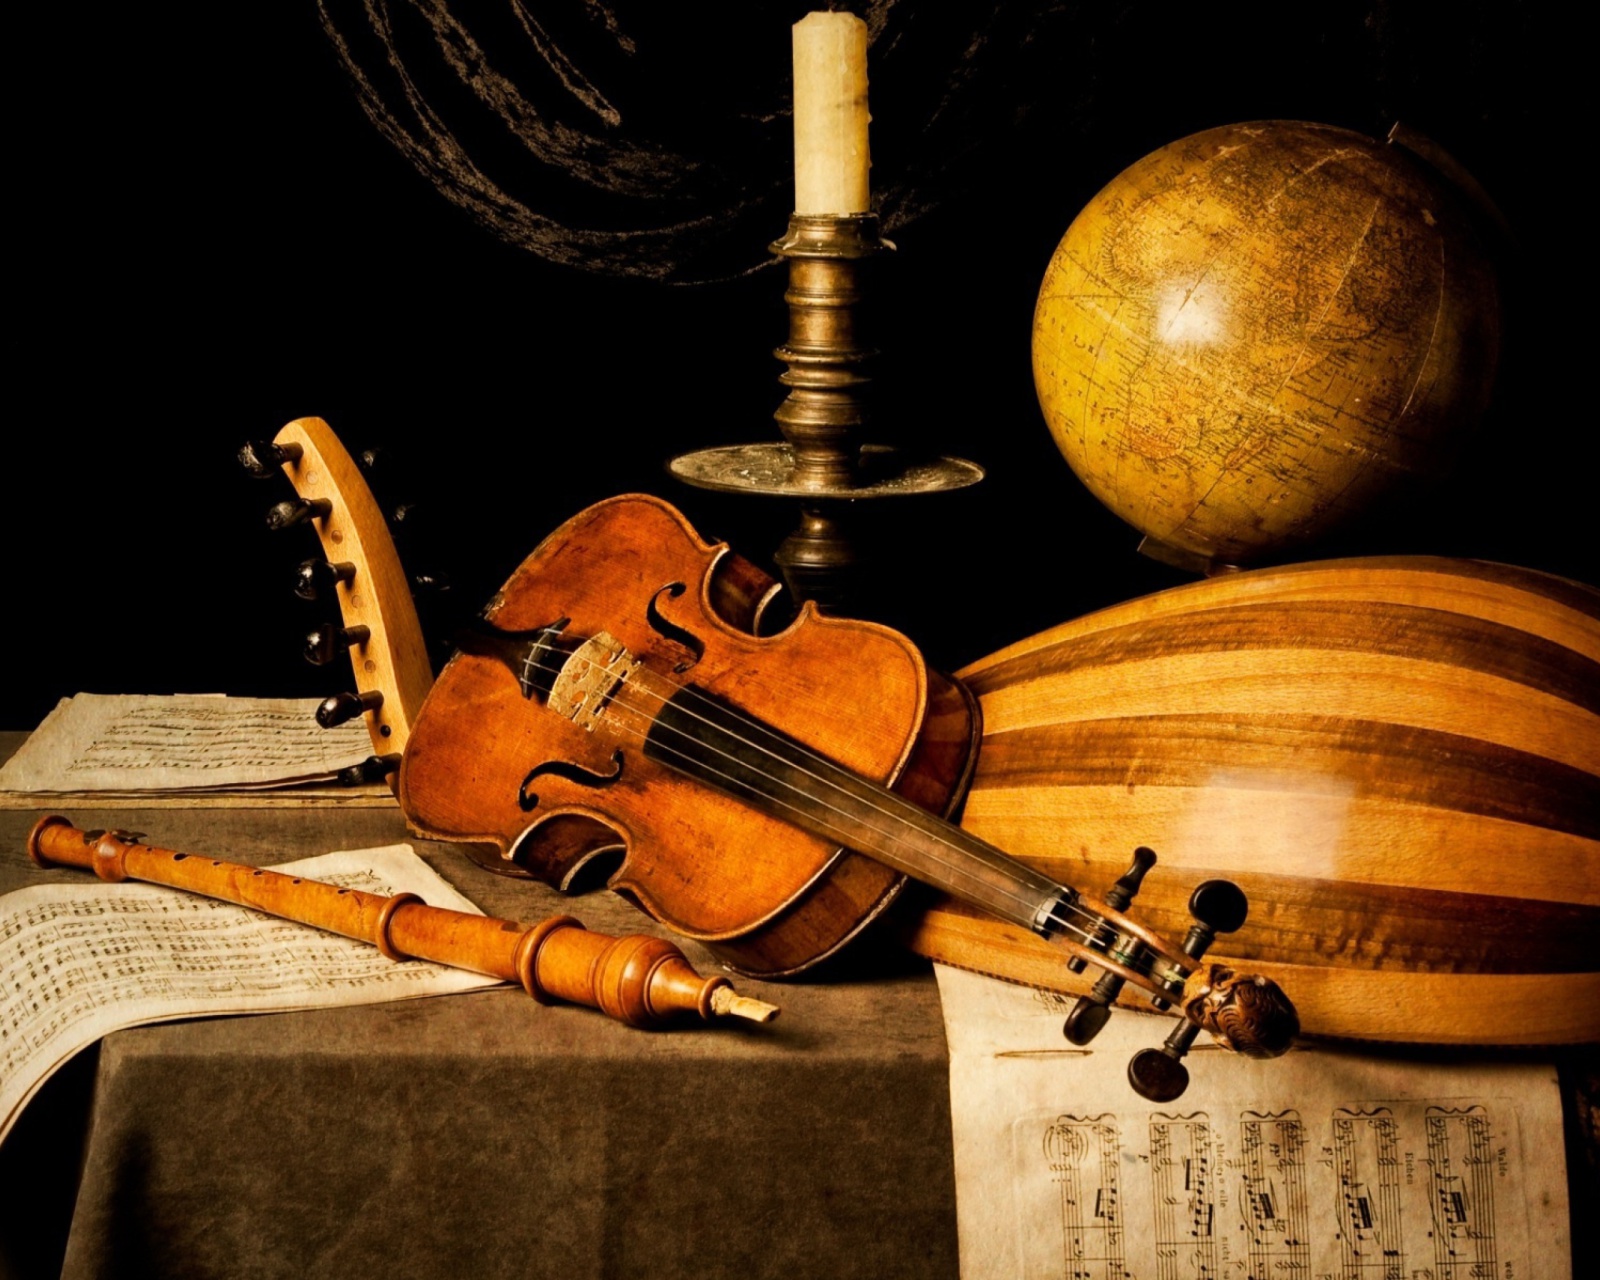 Still life with violin and flute screenshot #1 1600x1280